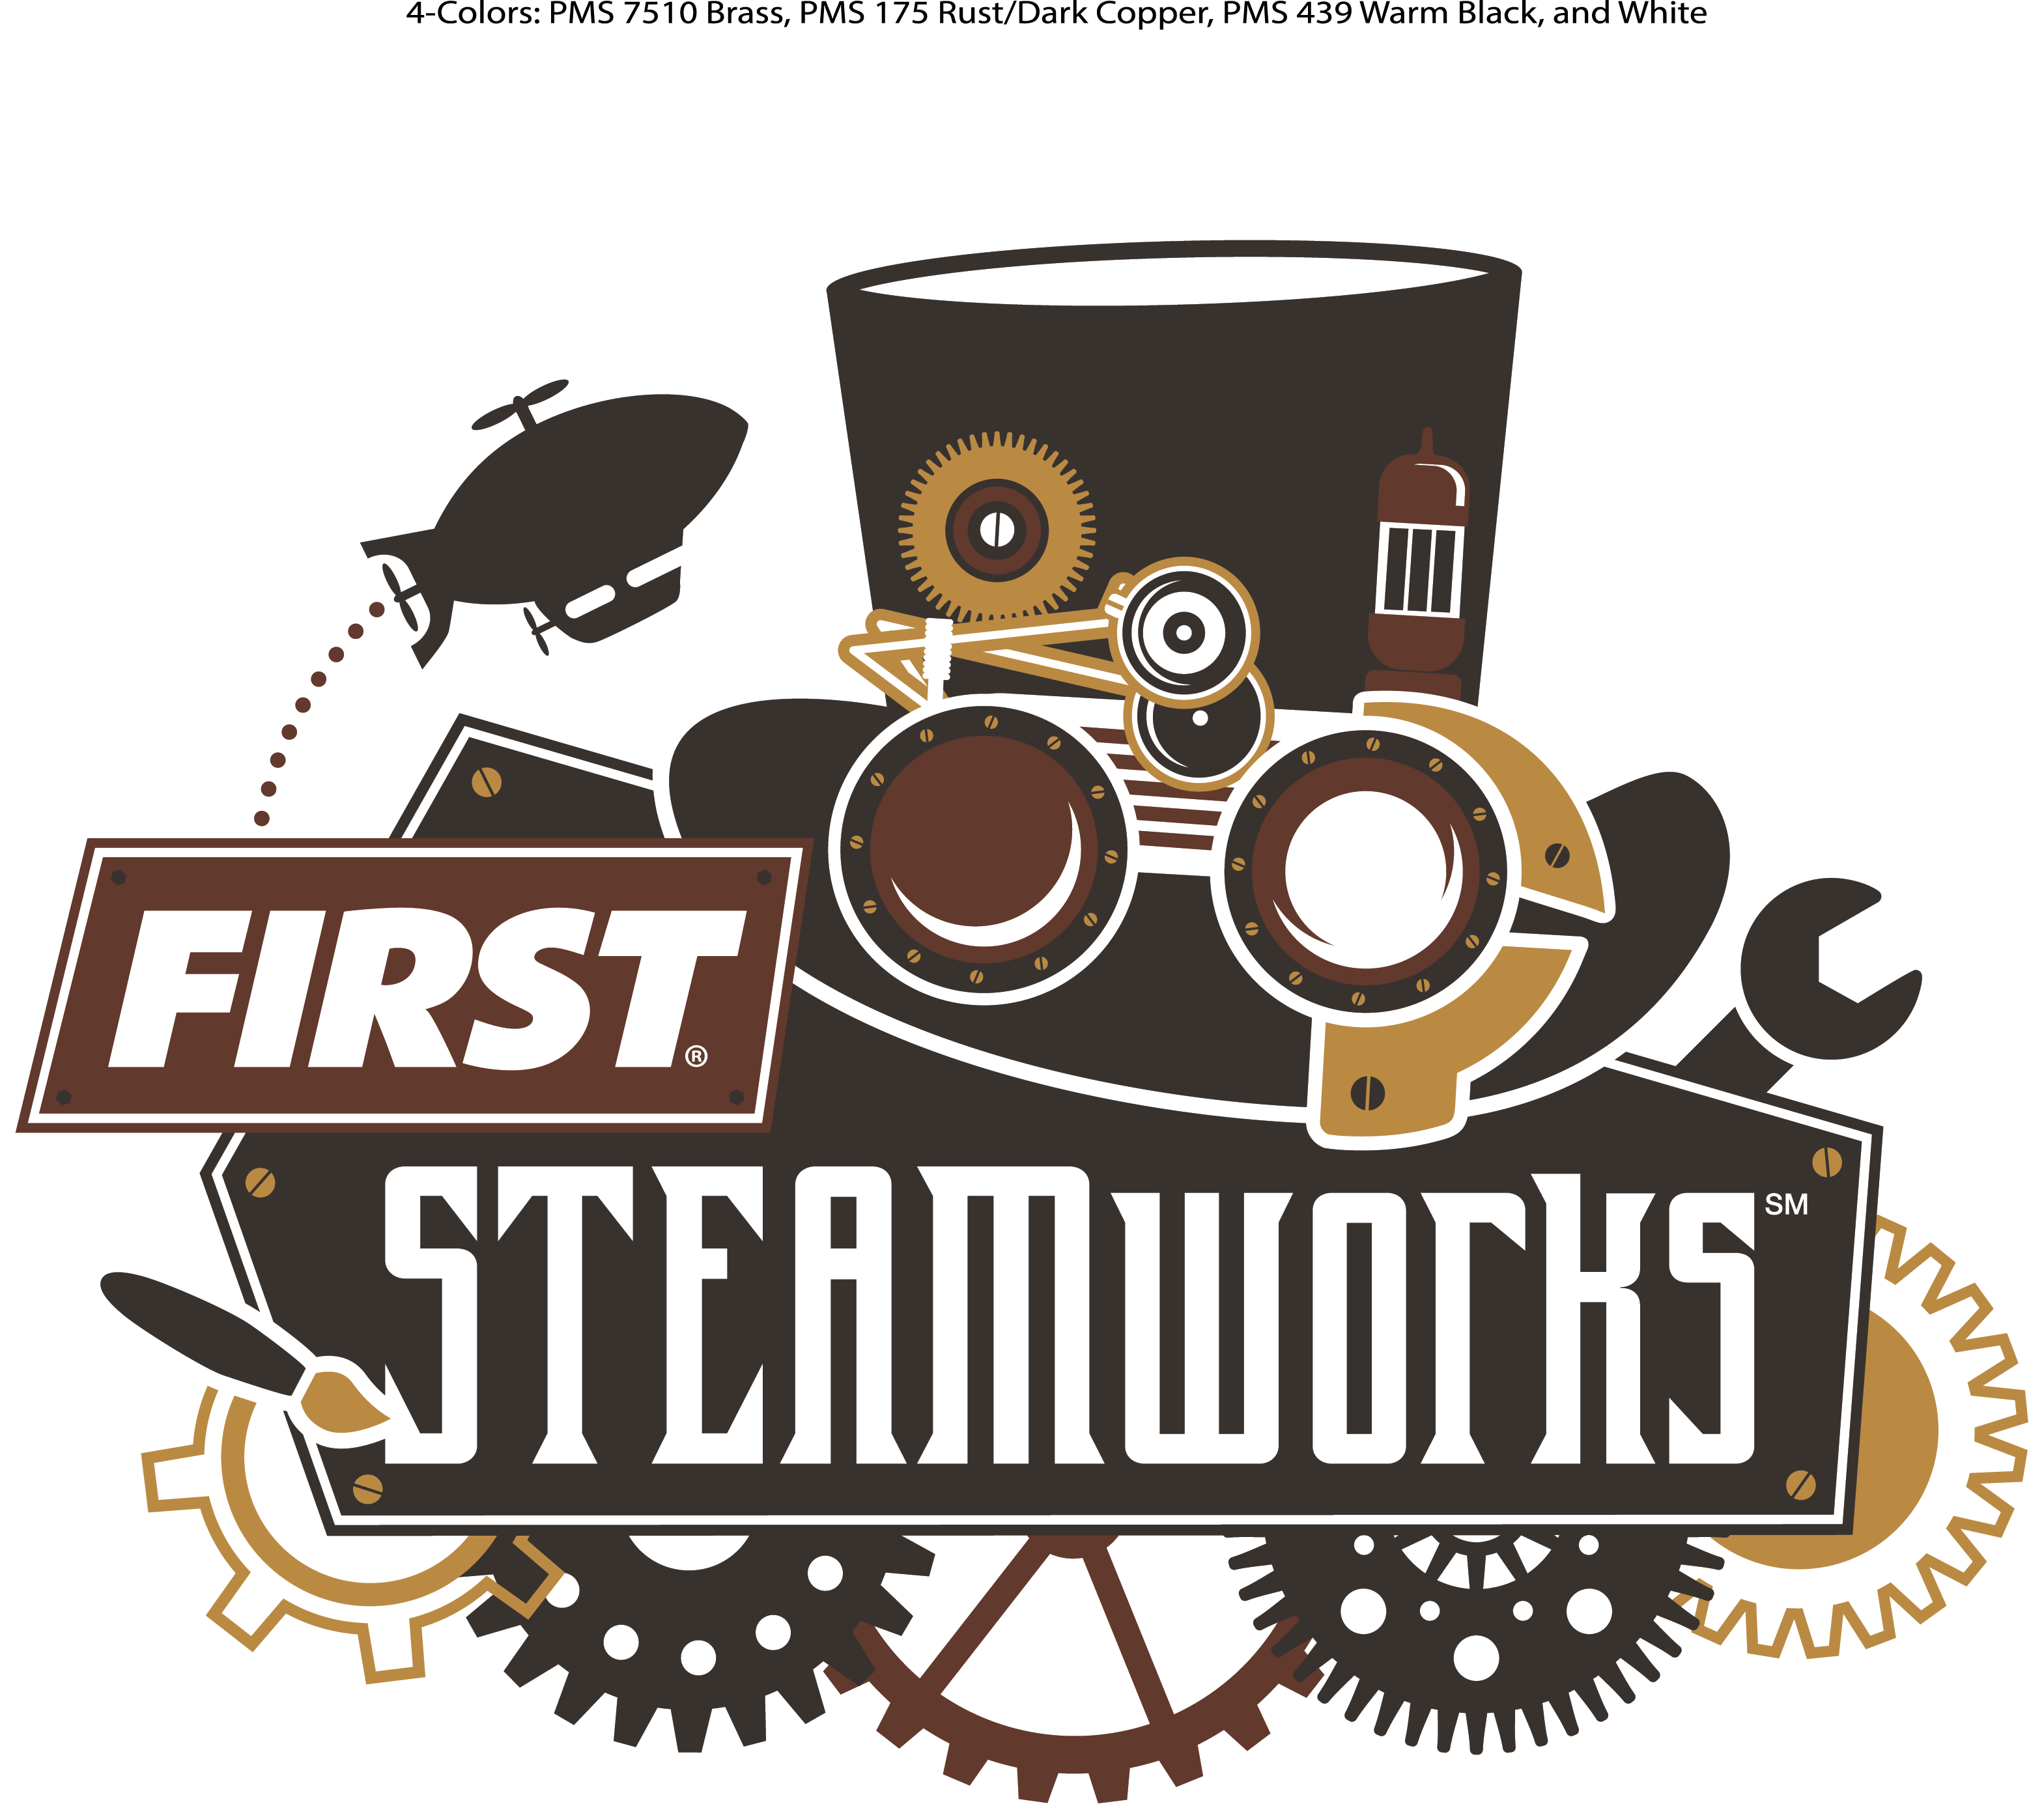 Rush Championship Steamworks Robot Motion Recycle Logo PNG Image